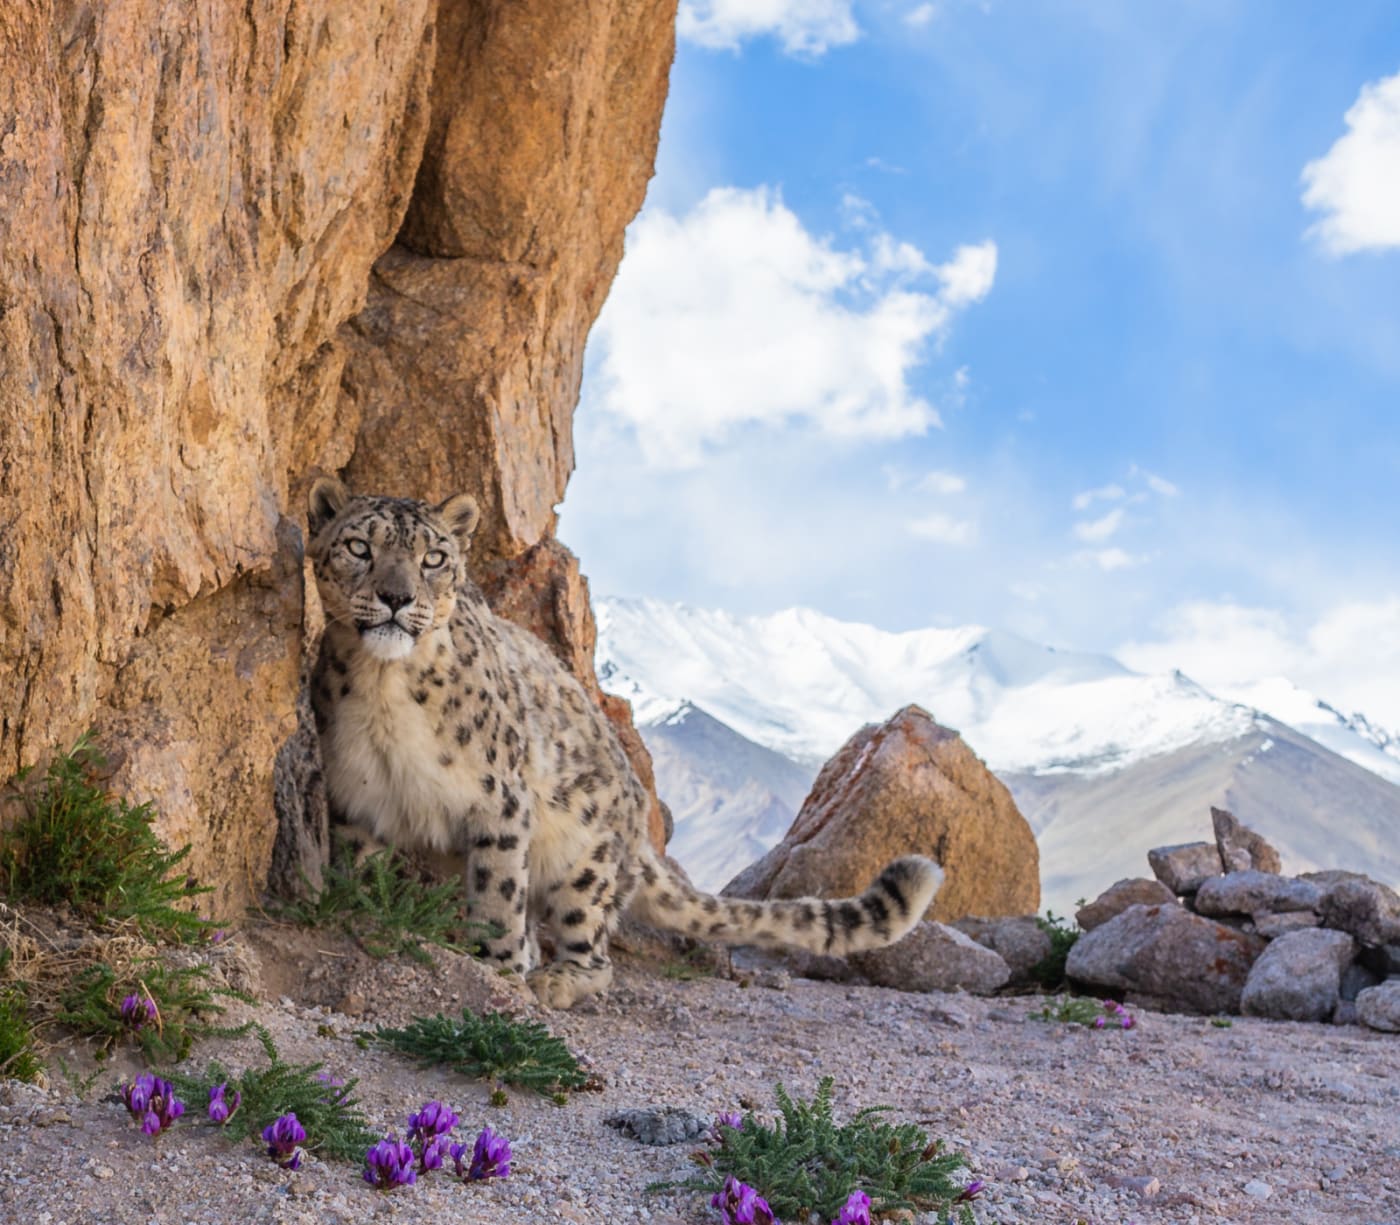 A wild snow leopard triggers a DSLR sensor camera high up in mountains of Ladakh in the Indian Himalayas.